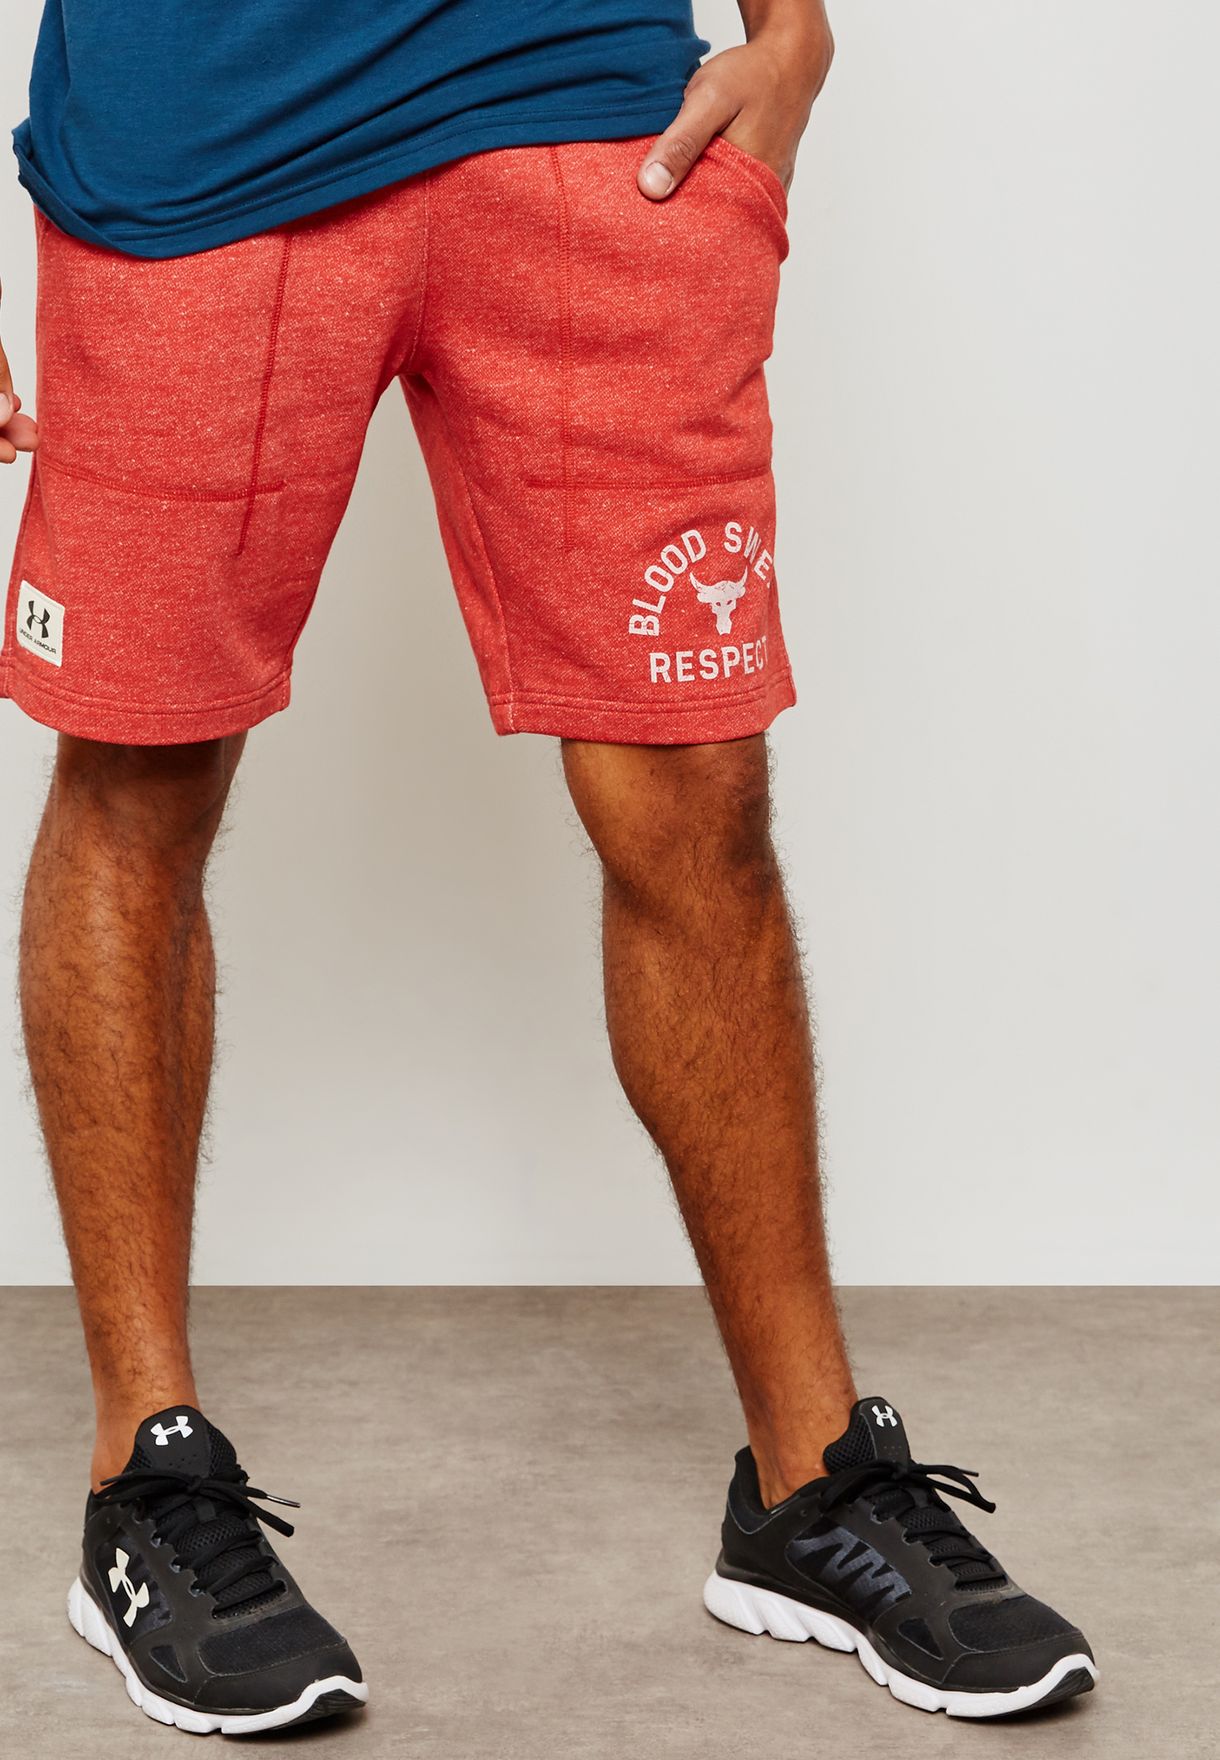 project rock respect shorts